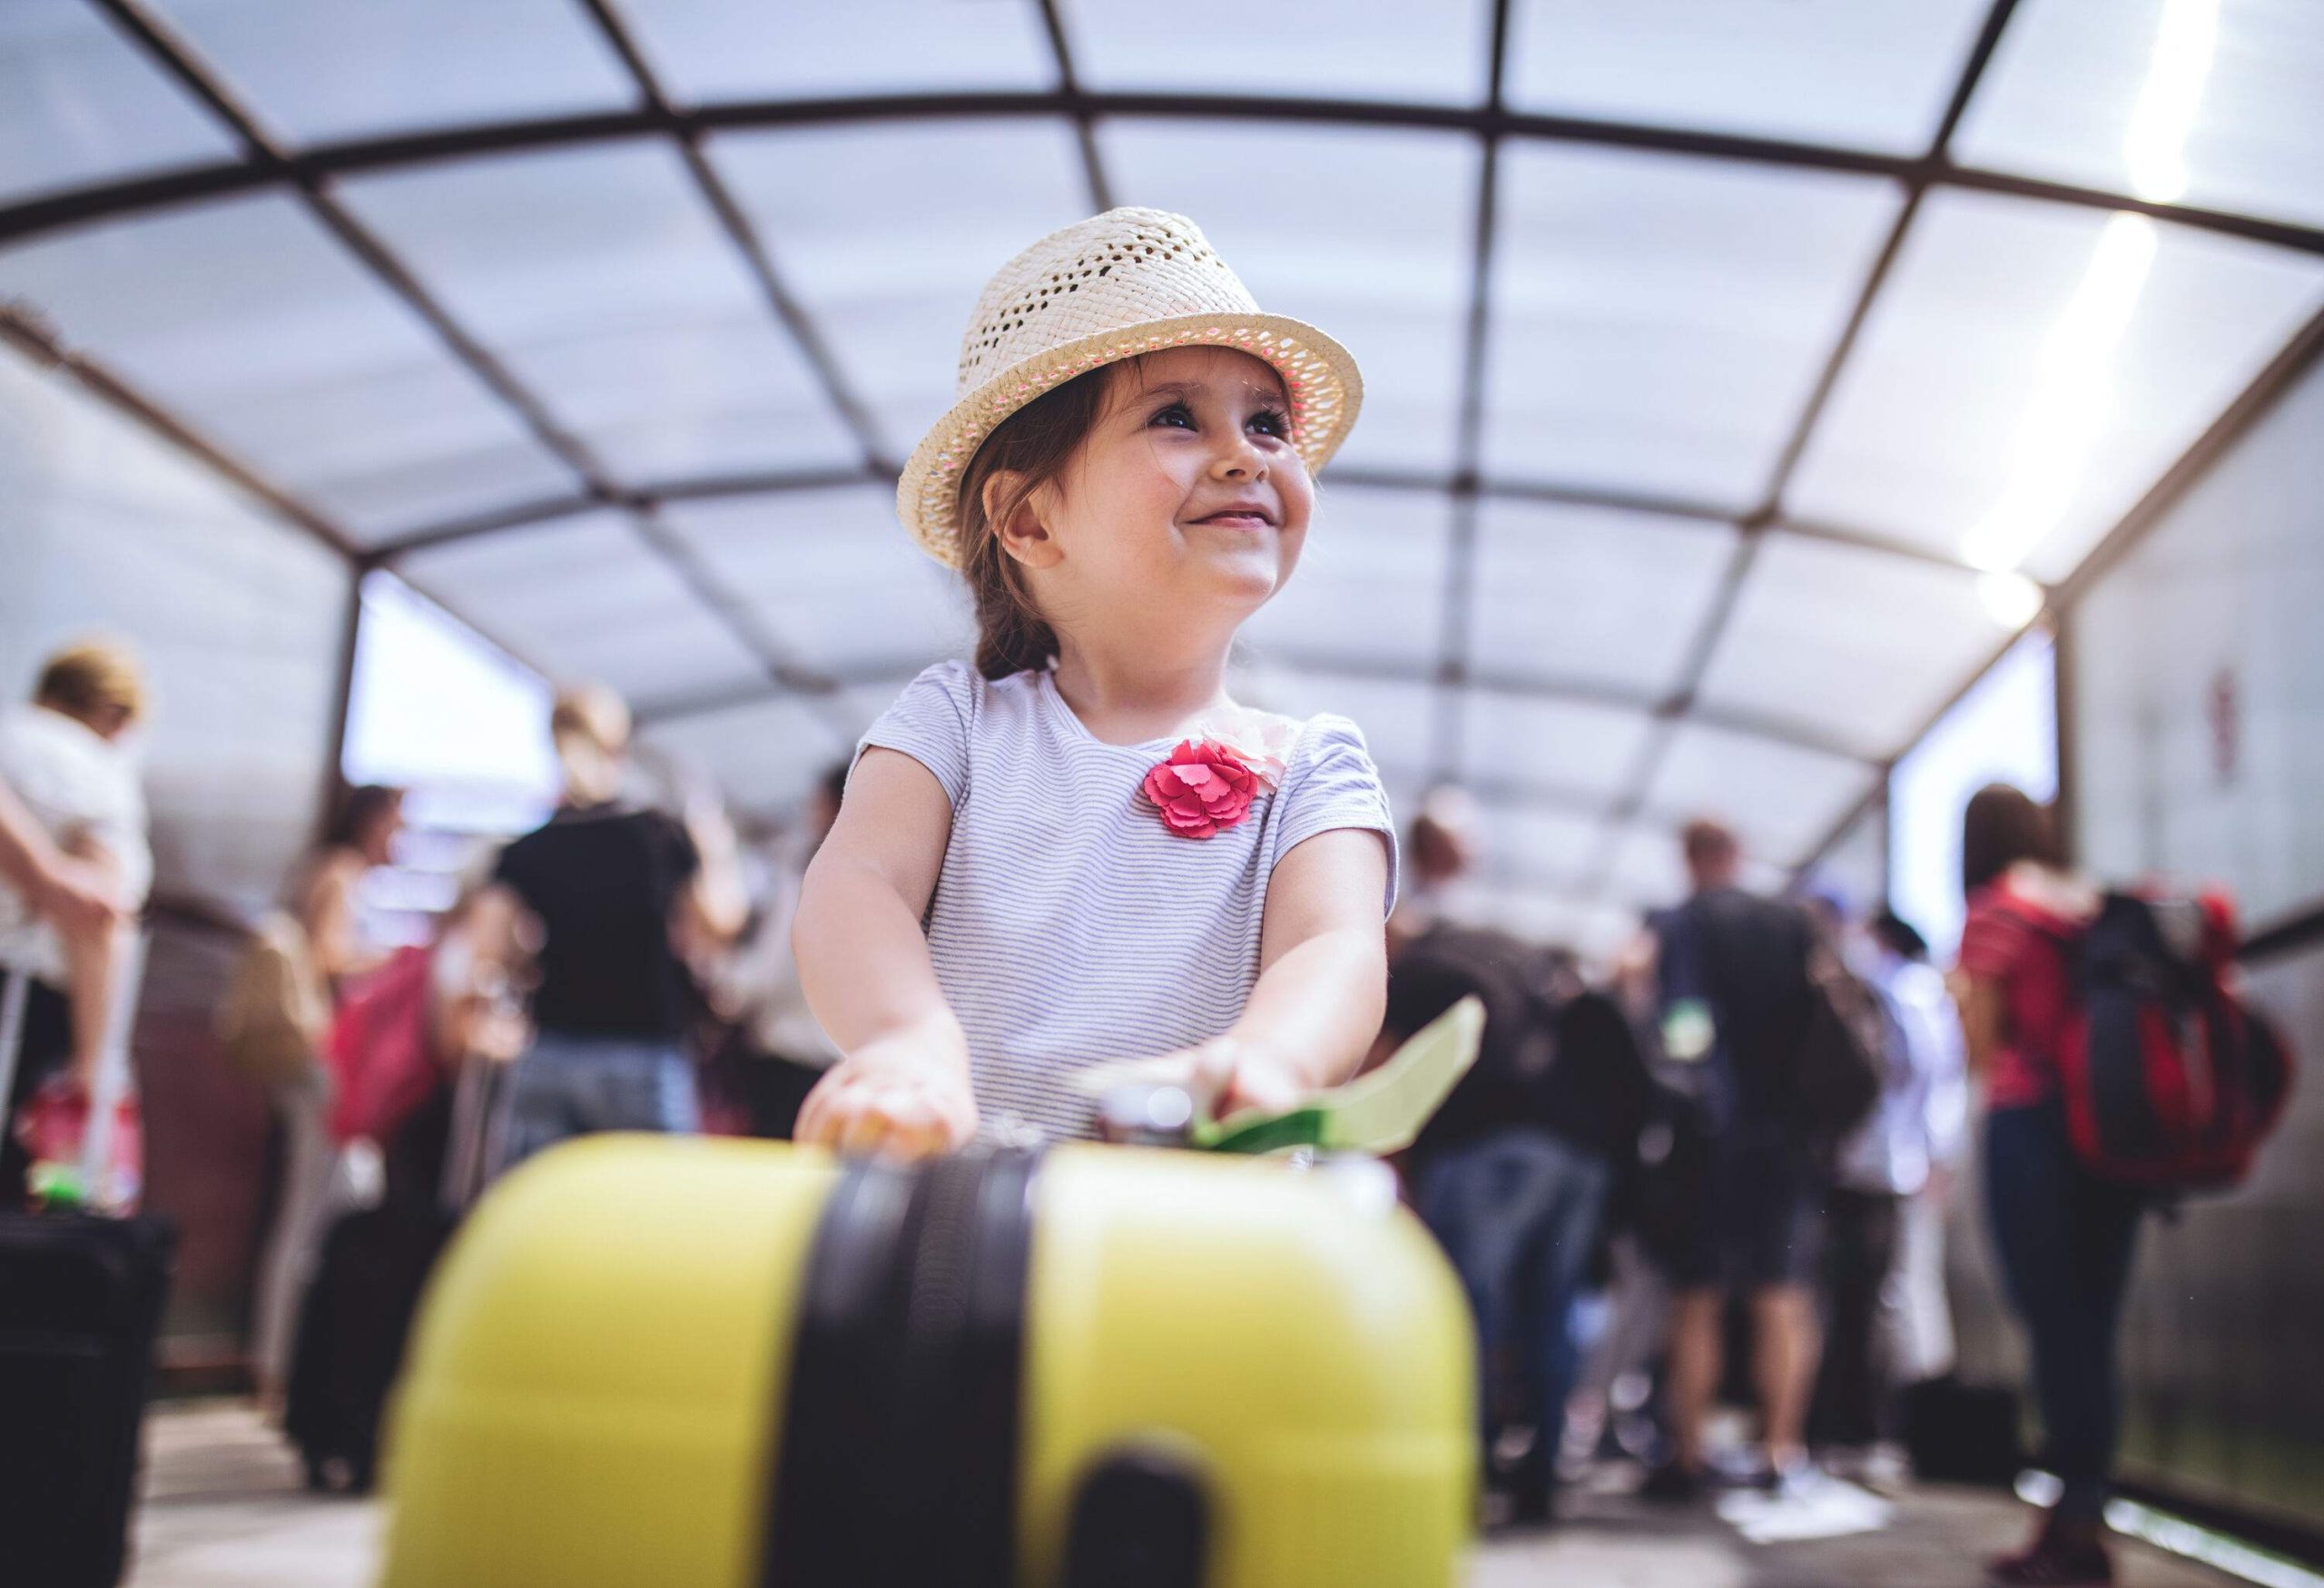 A cute little girl holds onto a yellow suitcase against the busy crowd in the background.